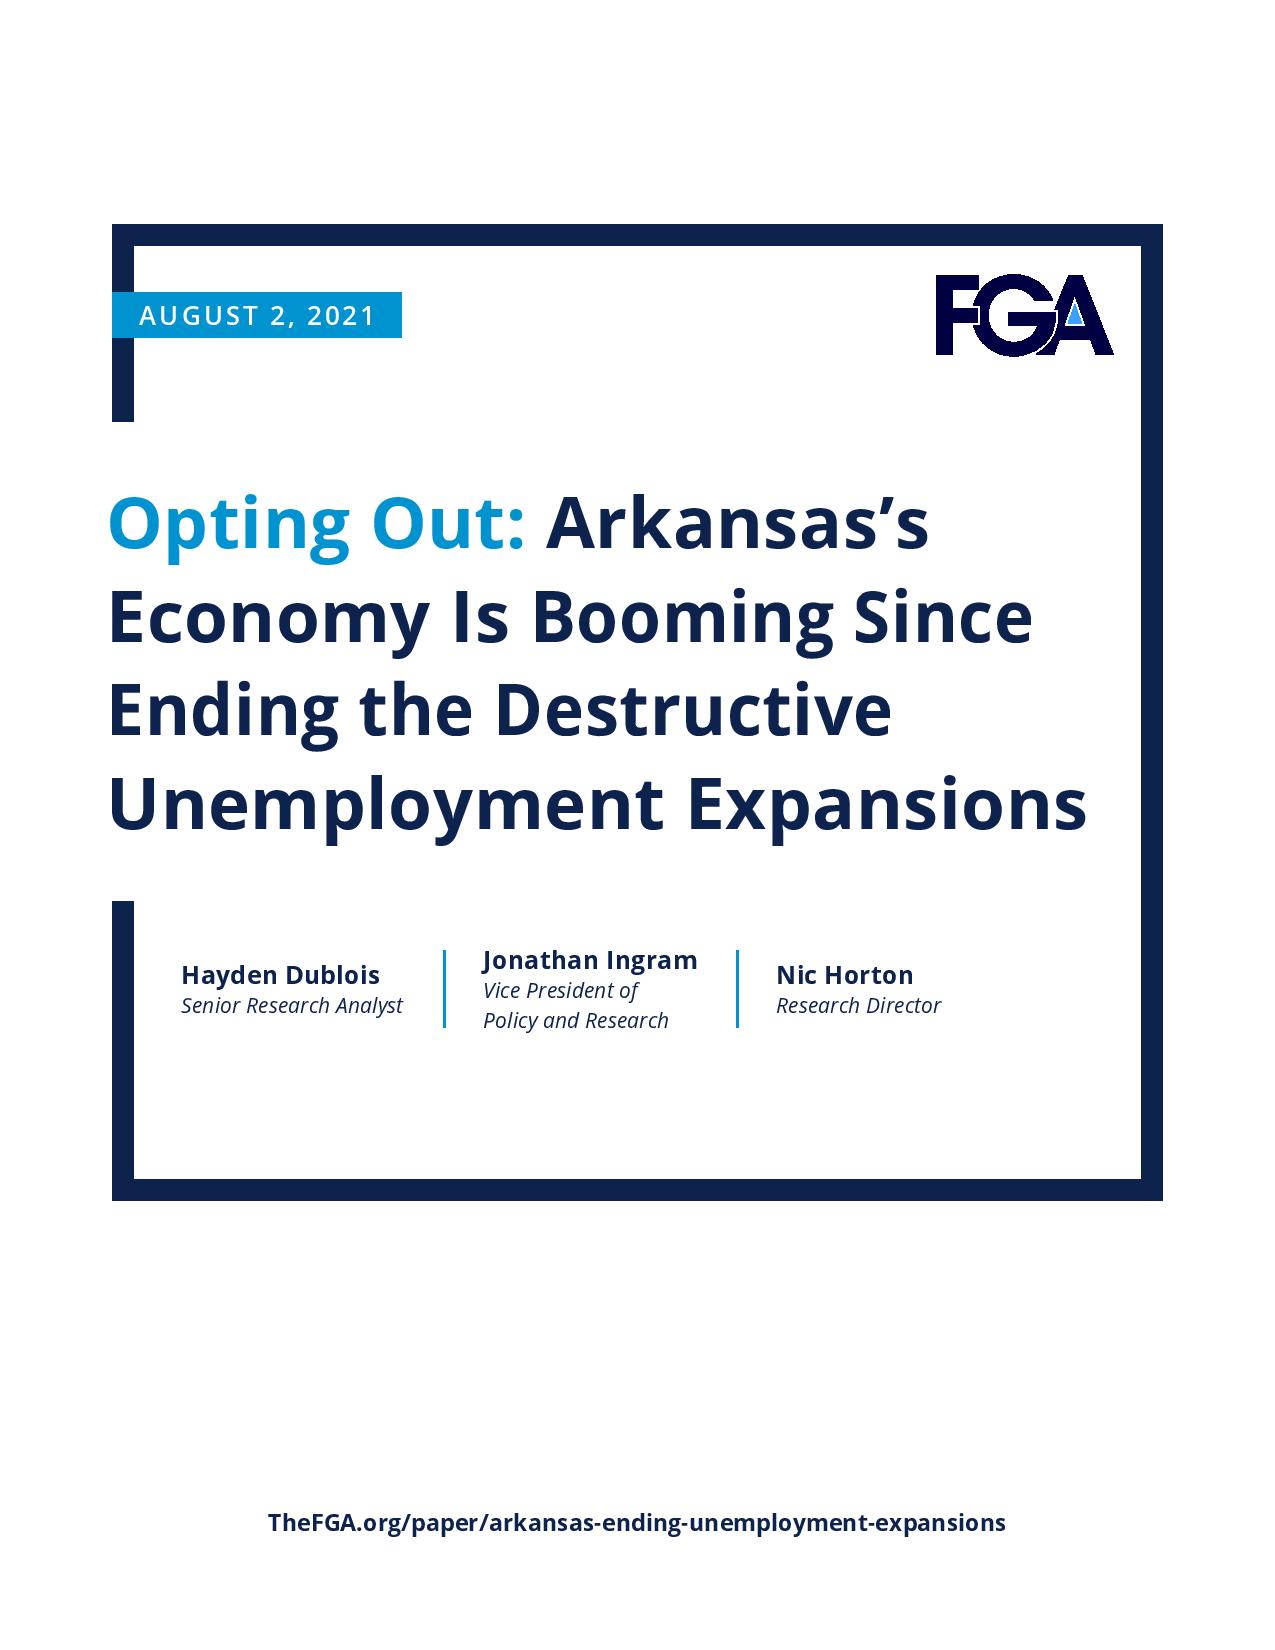 Opting Out: Arkansas’s Economy Is Booming Since Ending the Destructive Unemployment Expansions